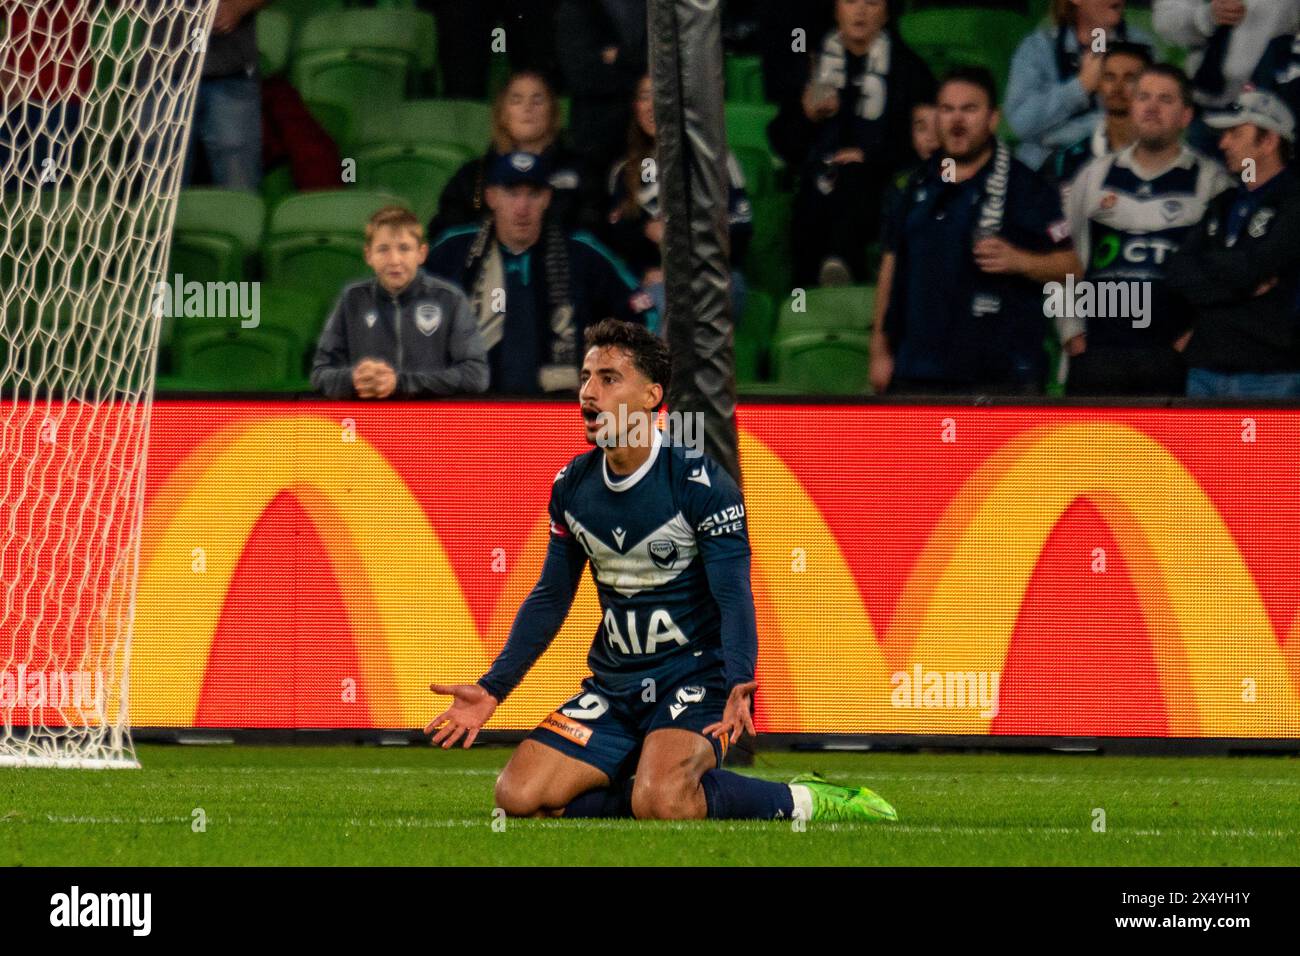 Melbourne, Australia. 5 May, 2024. Melbourne Victory v Melbourne City - 2024 Isuzu UTE A-League Men’s Finals Series - Elimination Final 1 - AAMI Park.  Melbourne Victory Forward Daniel Arzani (#19) appeals to Referee Alex King after being felled whilst on a counter attack during the 2024 A-League Men’s Elimination final 1 between Melbourne Victory FC and Melbourne City FC. Picture Credit: James Forrester/Alamy Live News Stock Photo